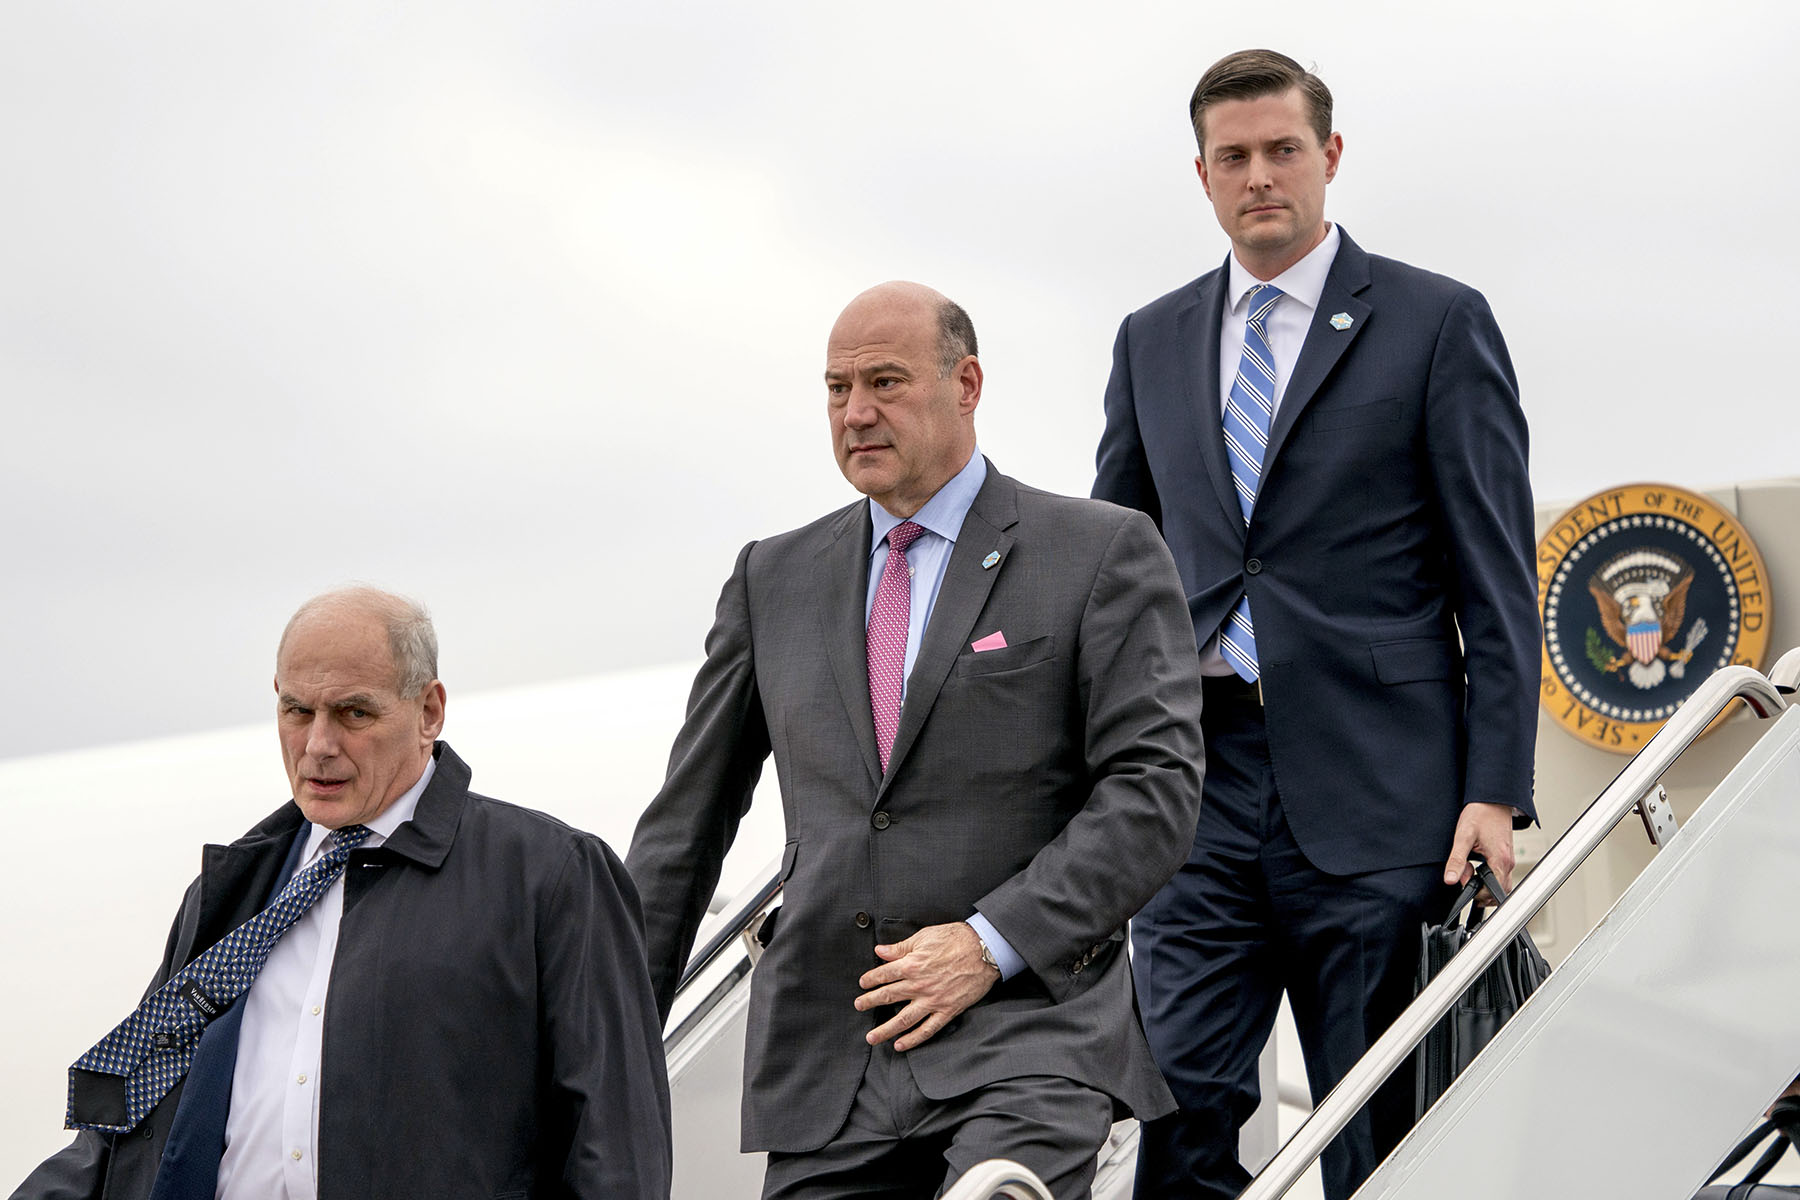 John Kelly (left), Gary Cohn (center) and Rob Porter arrive at Andrews Air Force Base in Maryland.